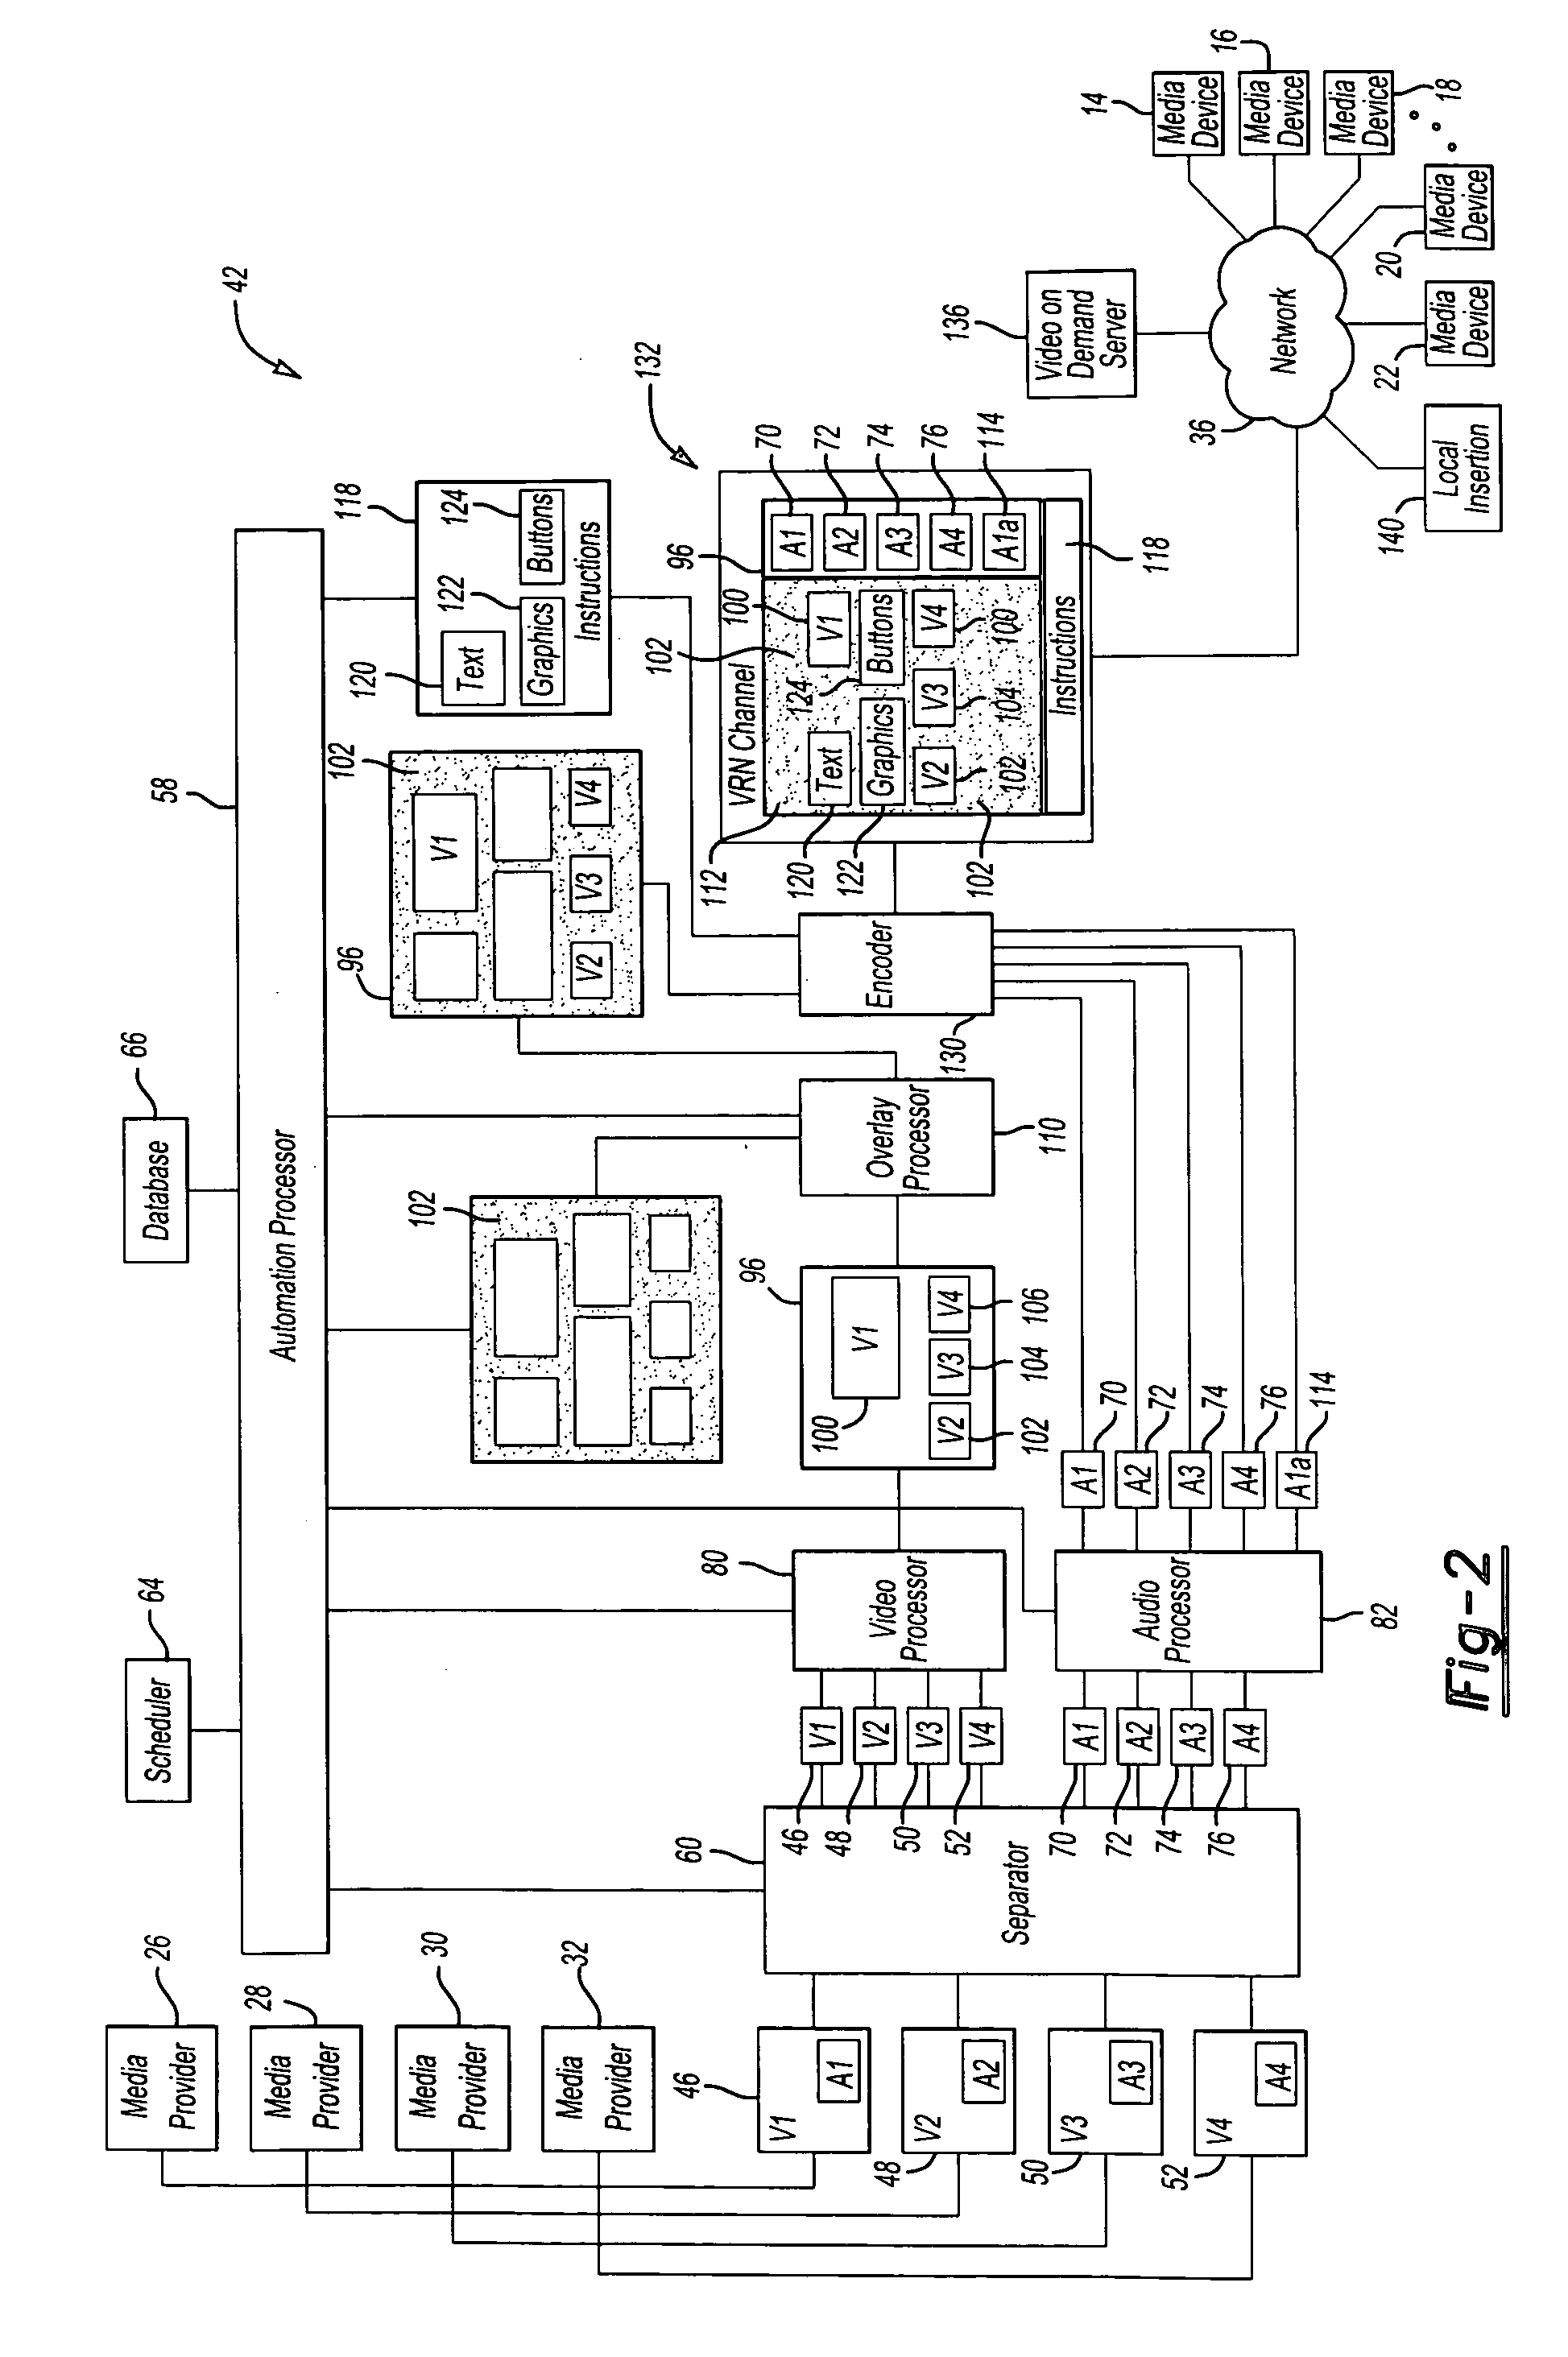 Method and system of providing user interface